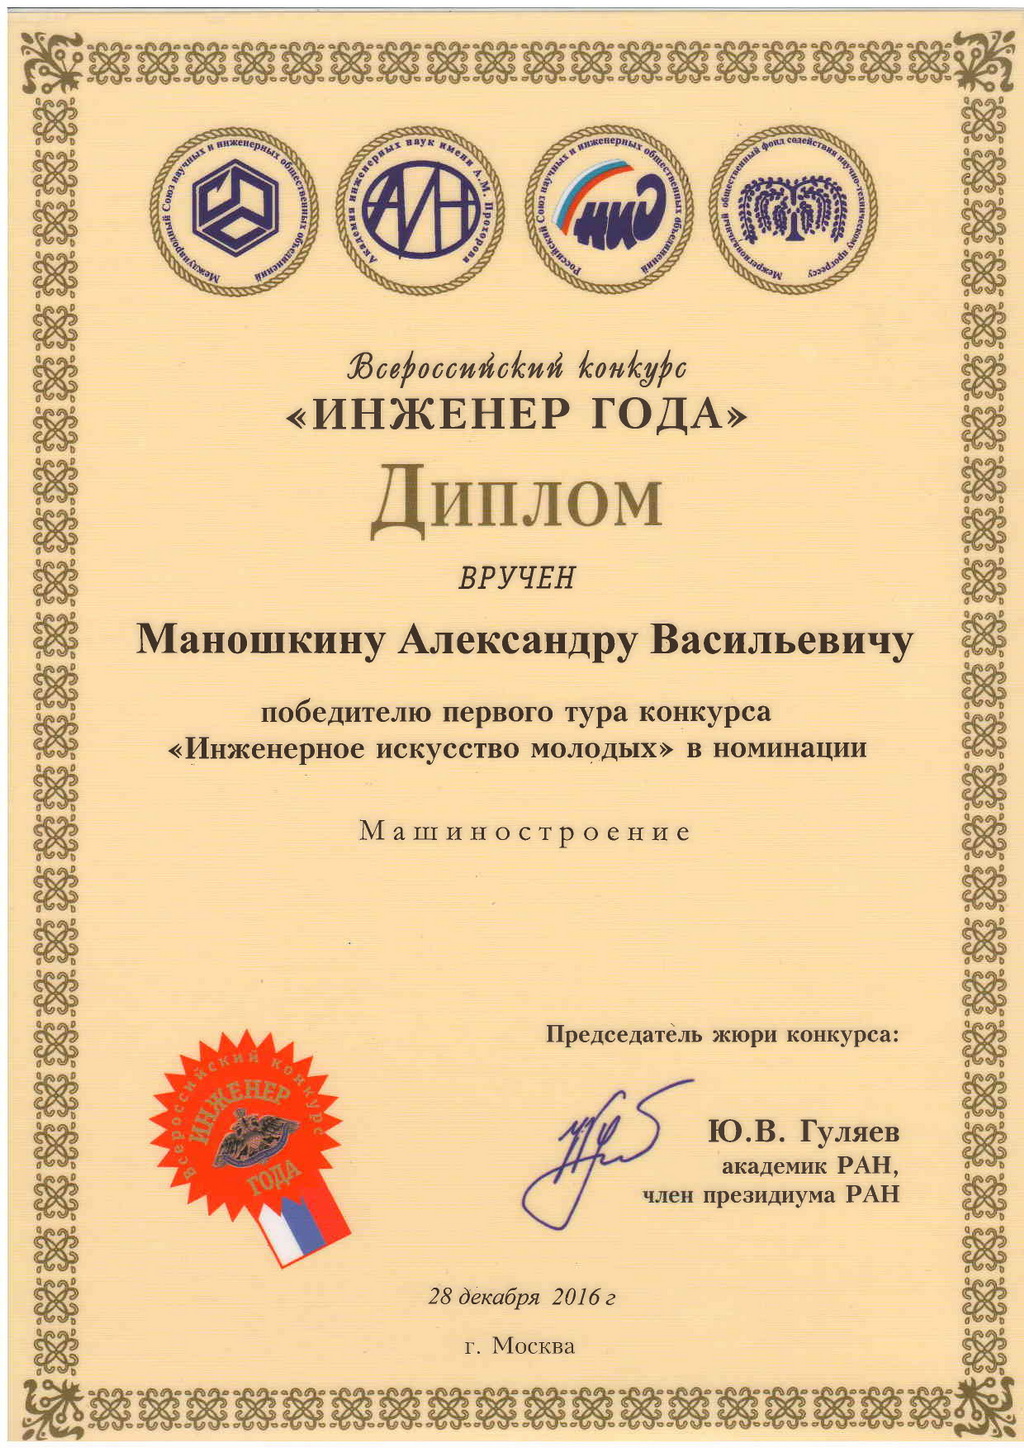 Diploma to the winner